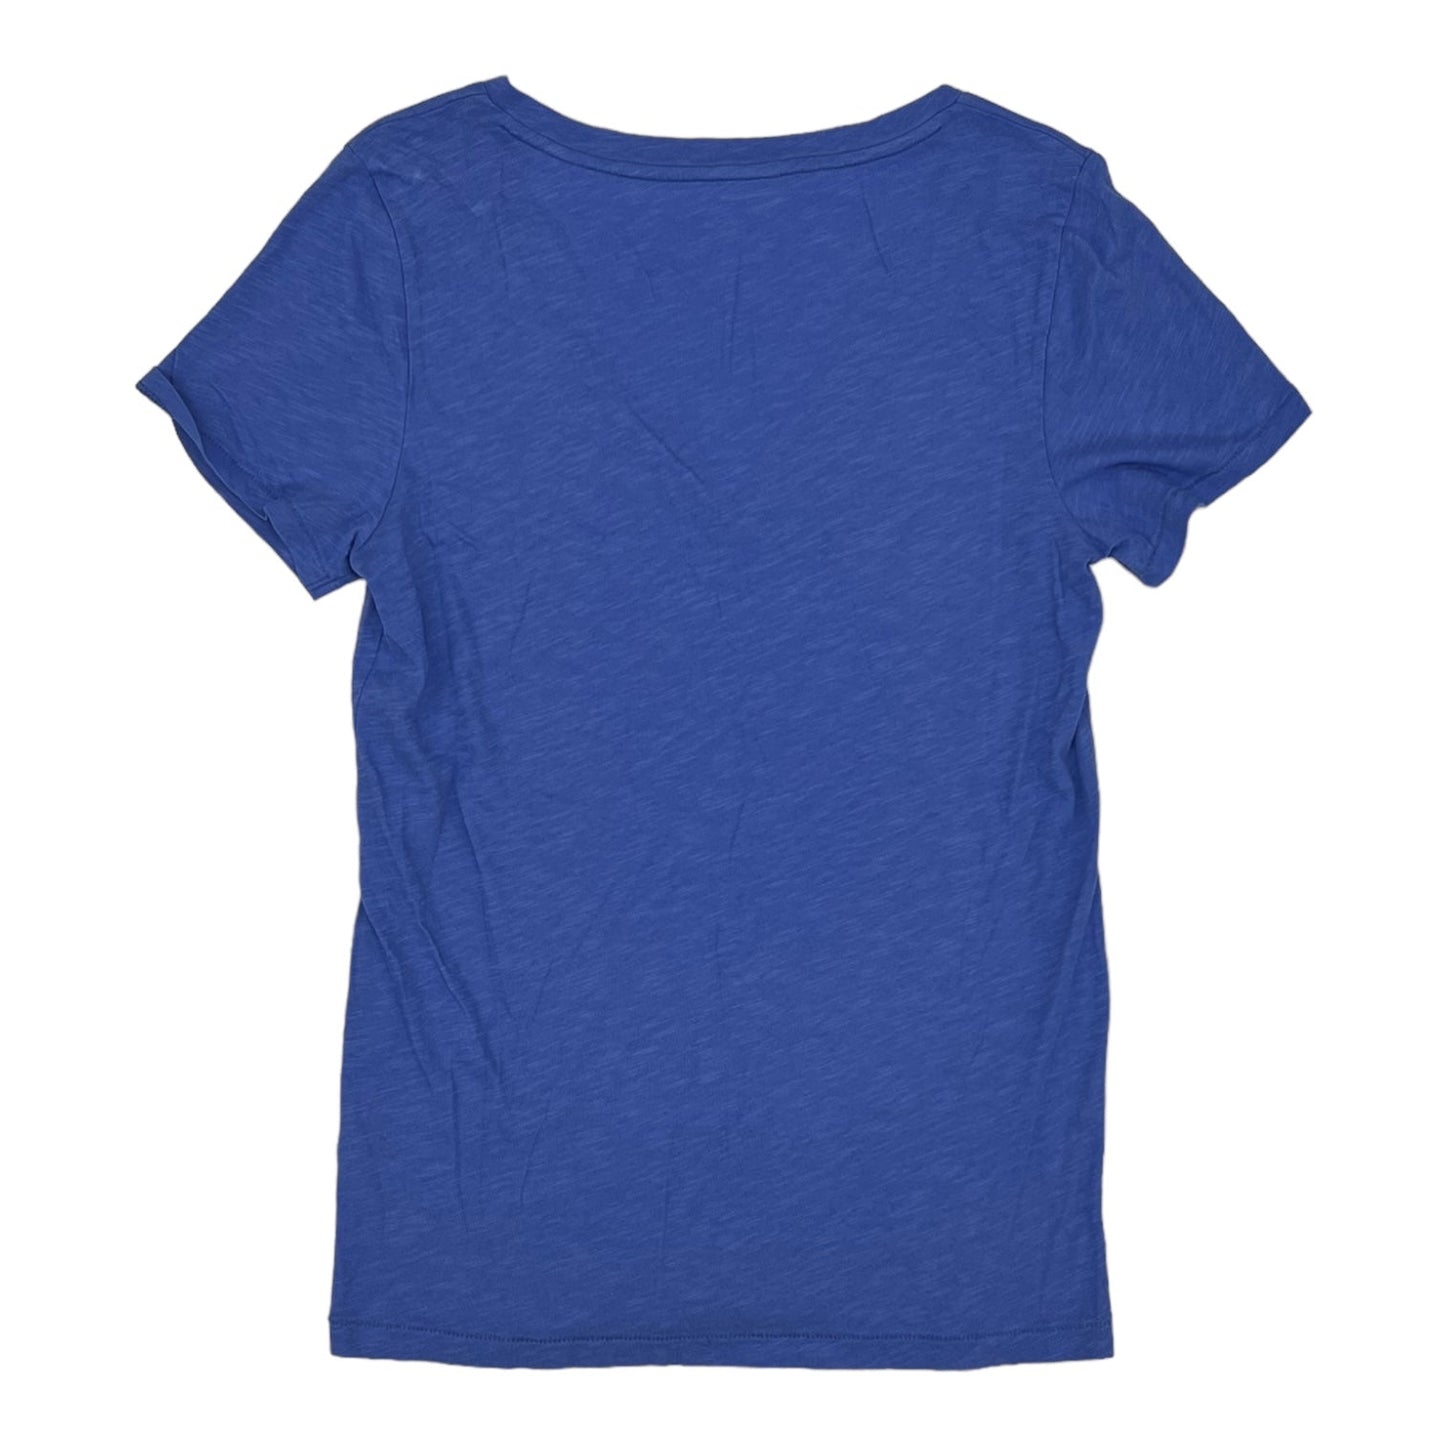 BLUE TOP SS BASIC by J. CREW Size:M